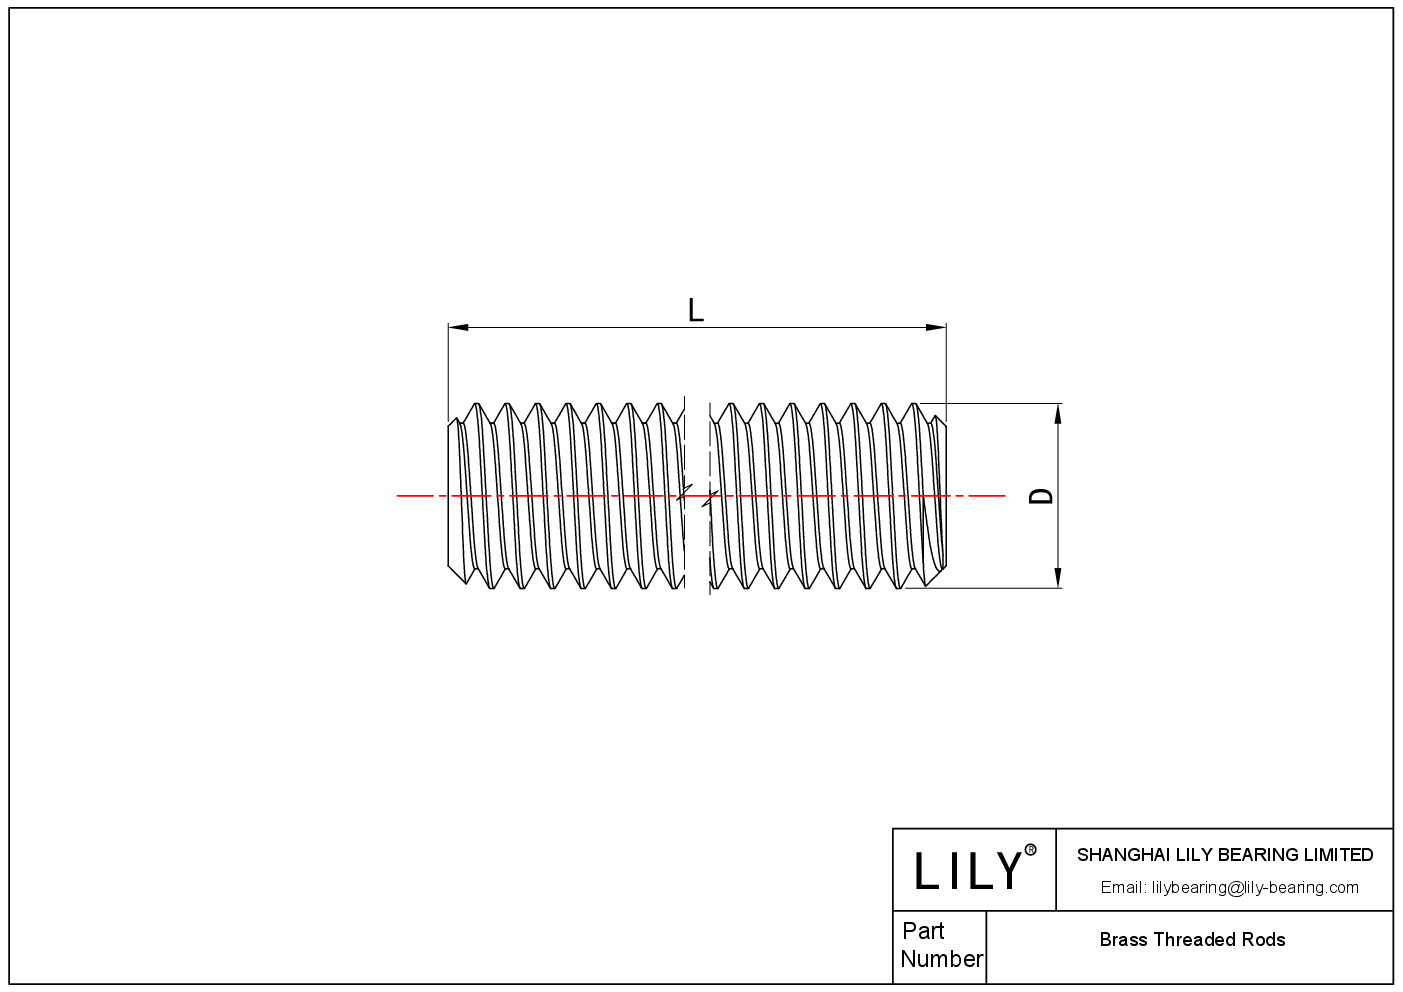 JDACFADGD Brass Threaded Rods cad drawing